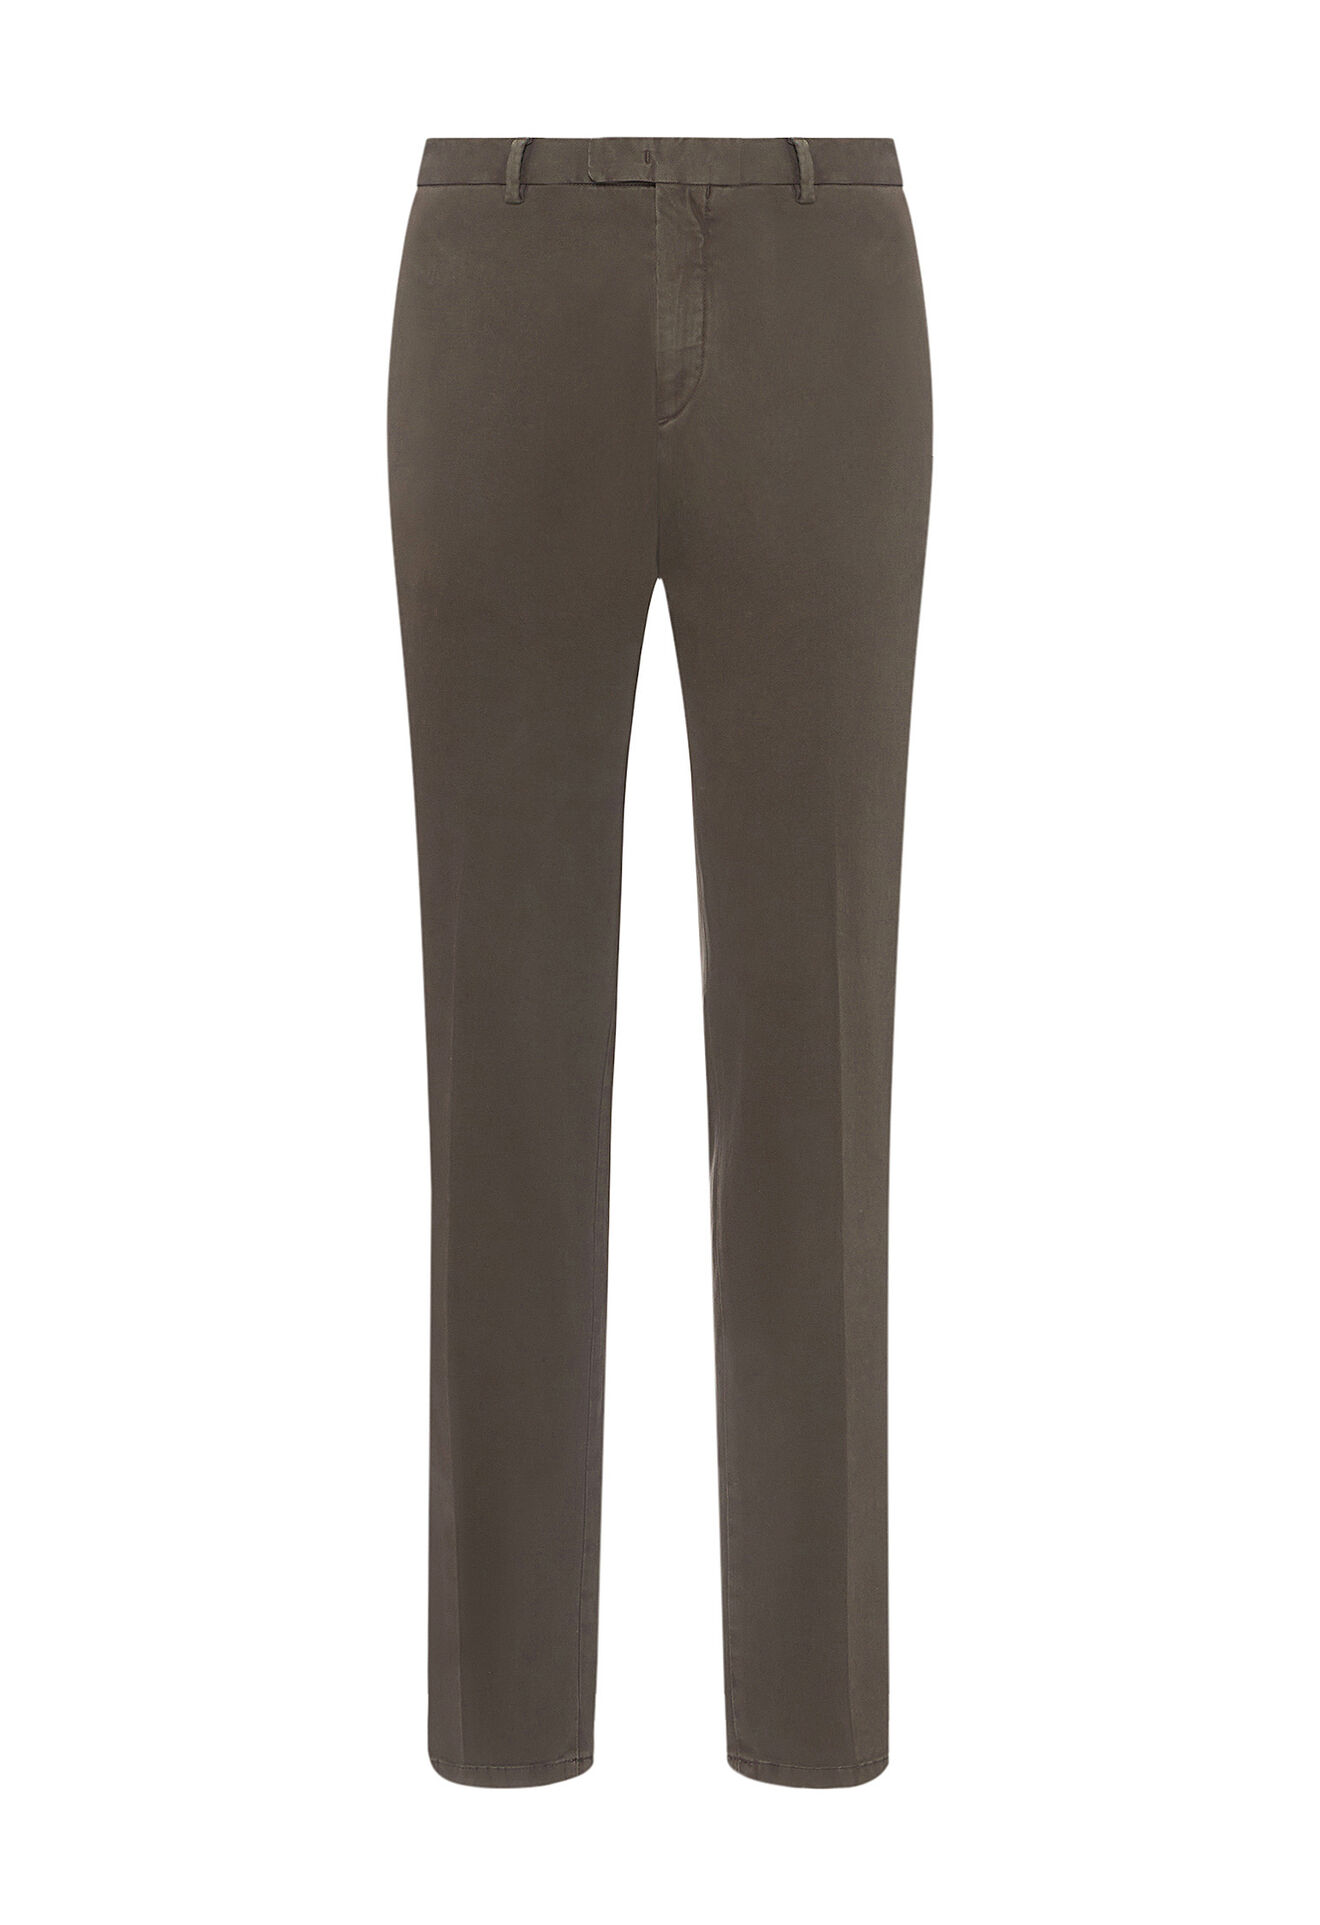 Stretch cotton trousers in Brown: Luxury Italian Trousers